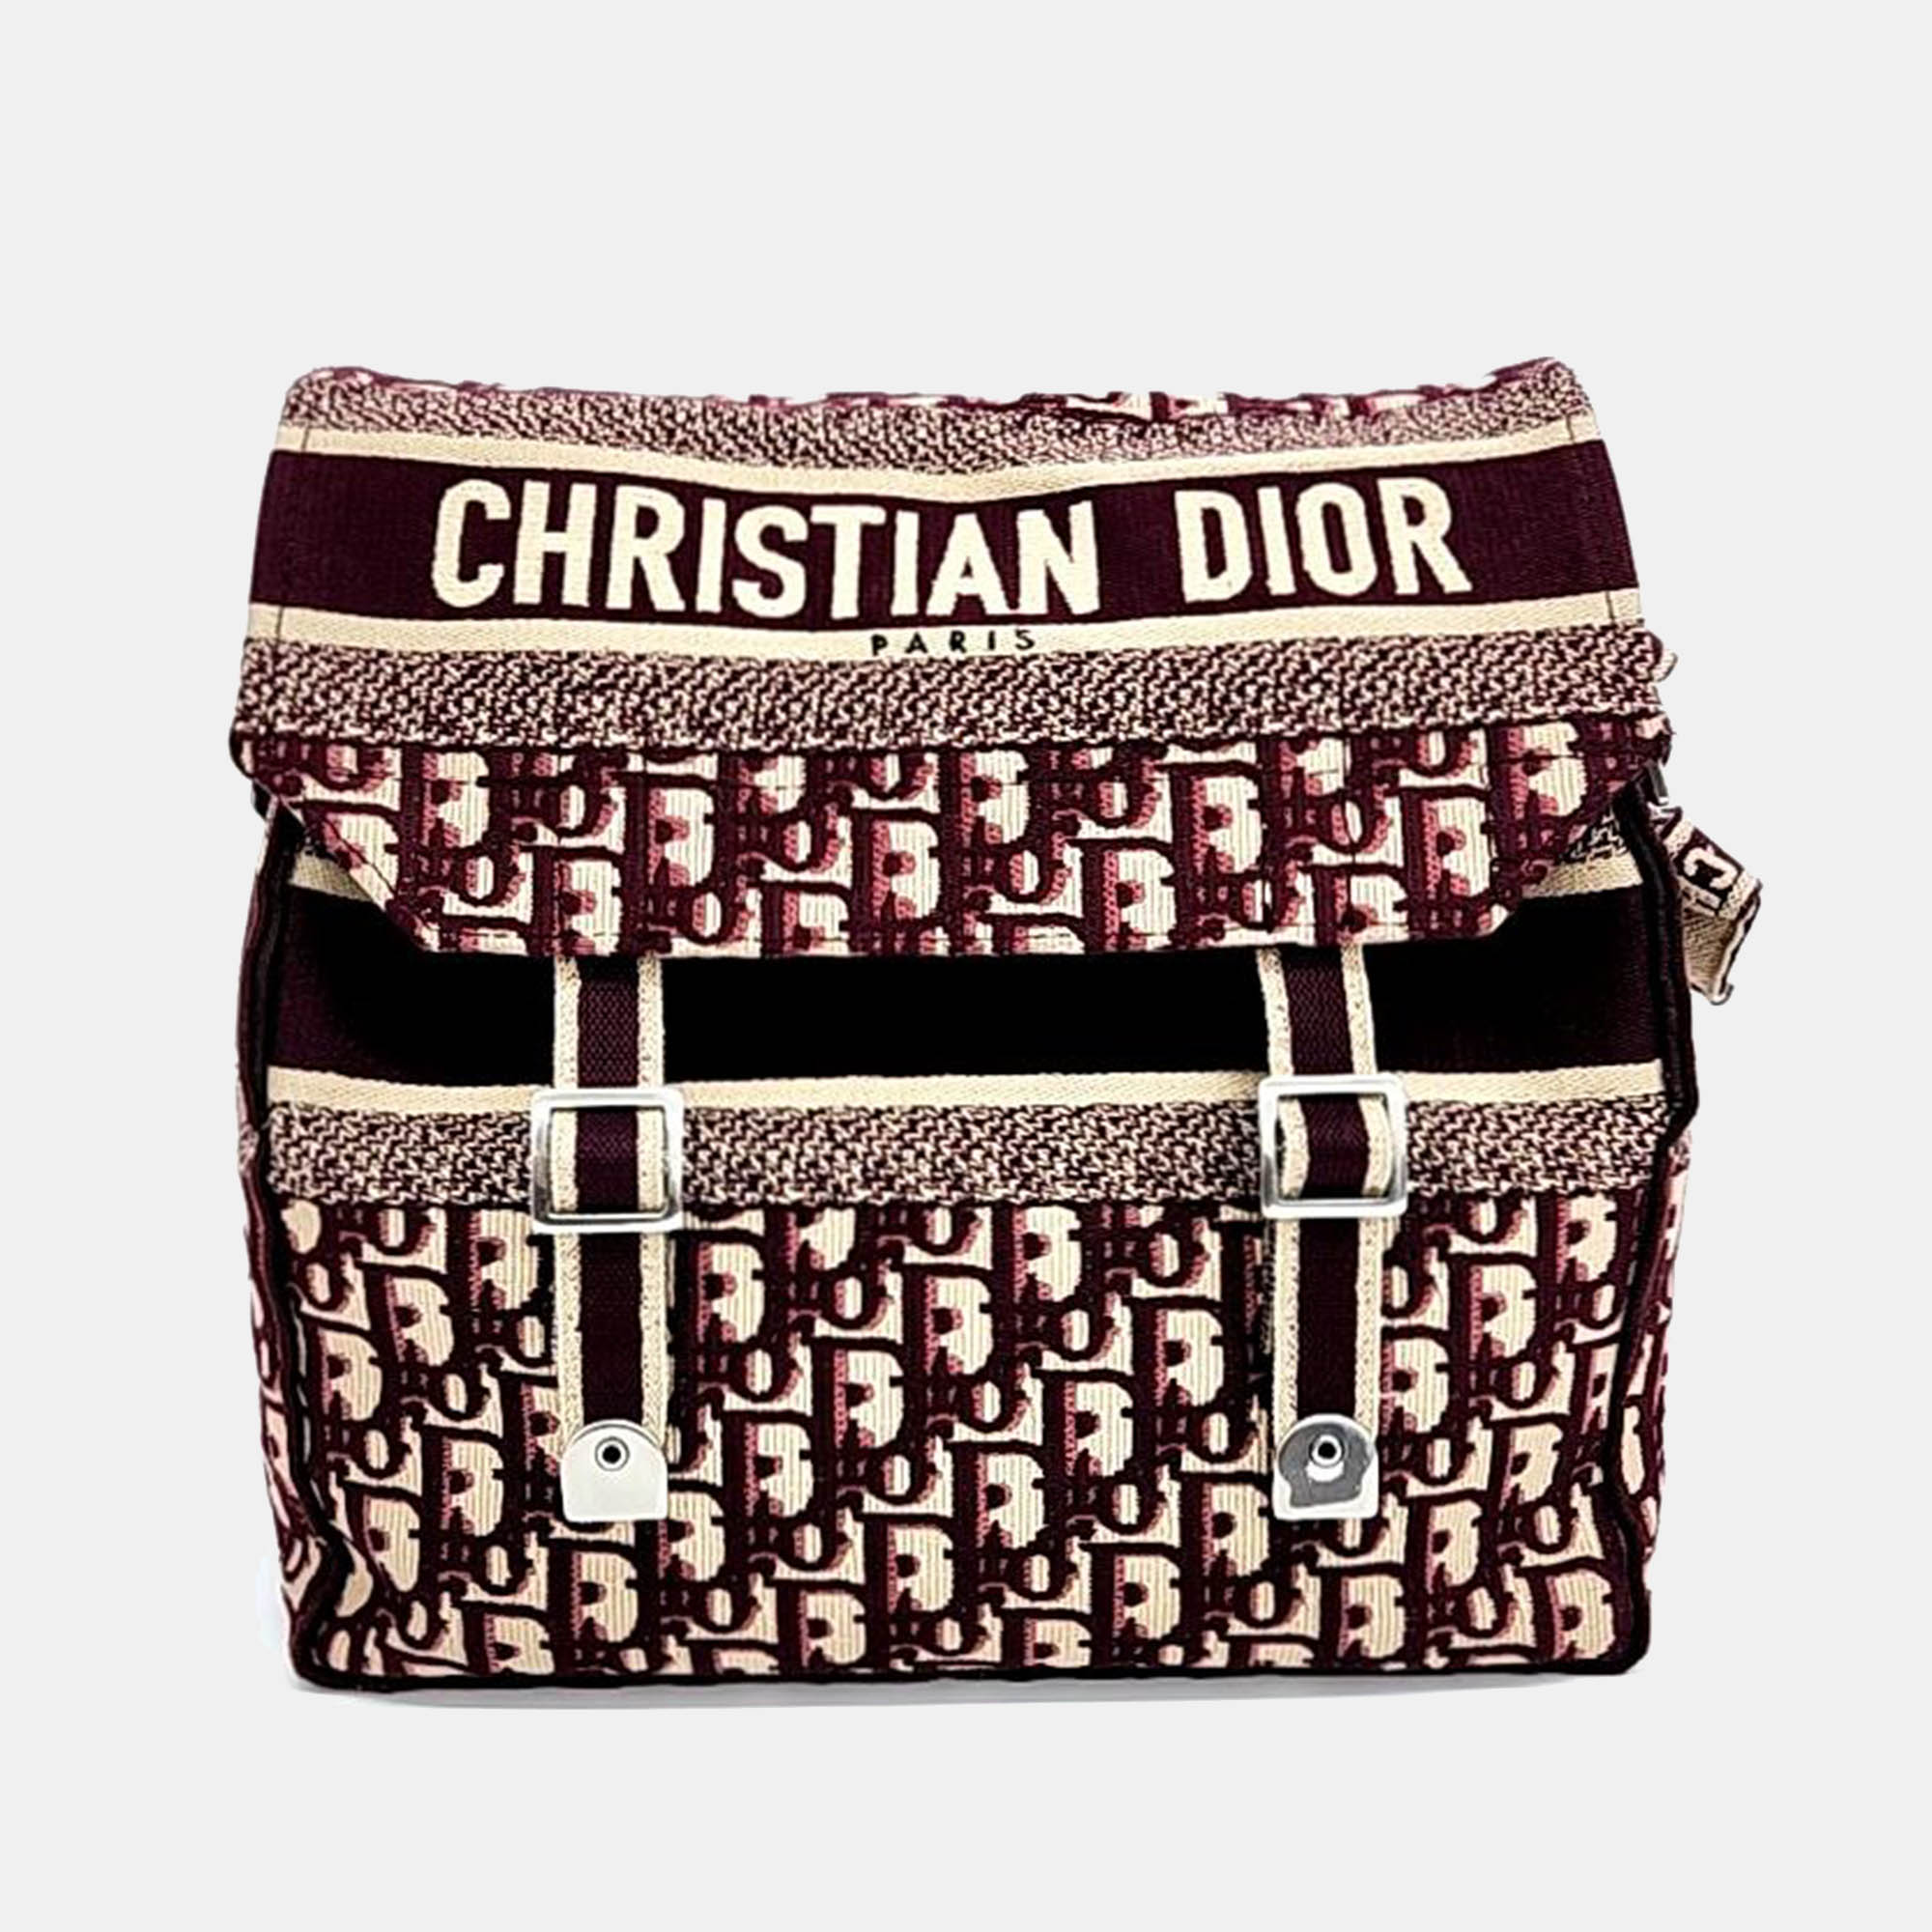 Elevate your style with an exquisite Dior bag. This timeless masterpiece is crafted from high grade materials adorned with the iconic Dior motifs and features meticulous craftsmanship for luxury and sophistication.